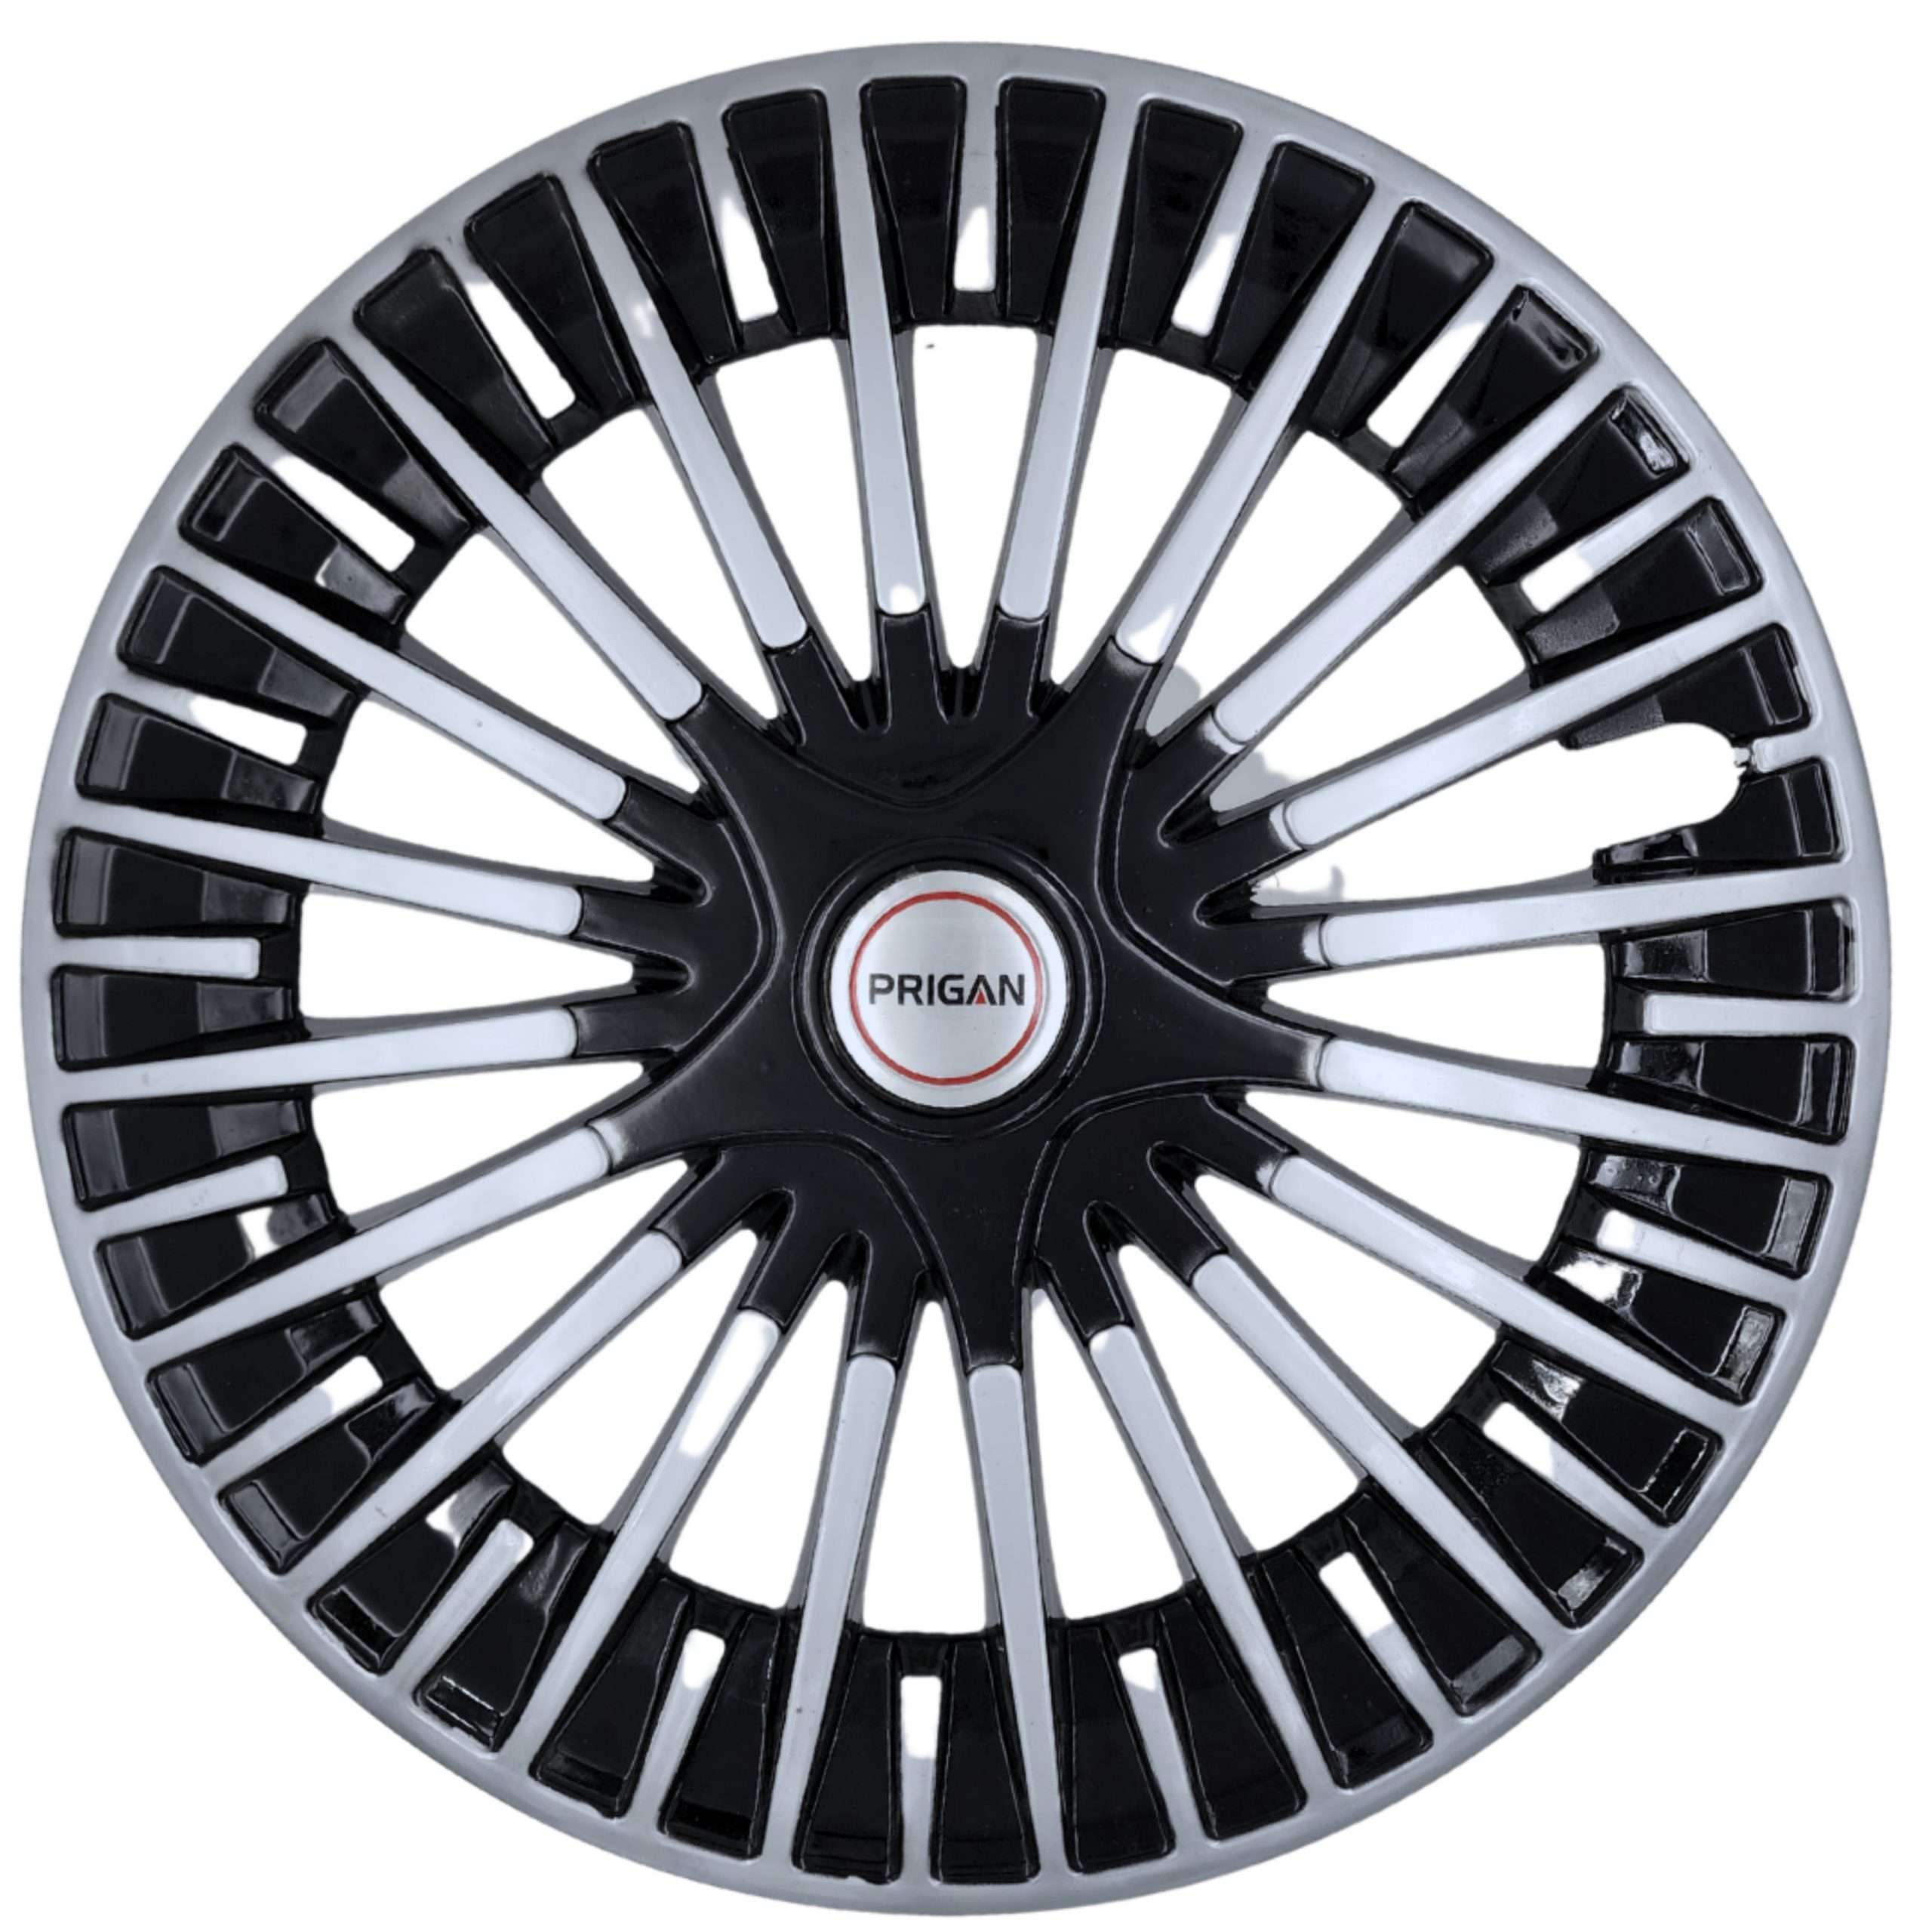 Car Wheels: Everything You Need To Know About Steel Wheels Vs Alloy Wheels